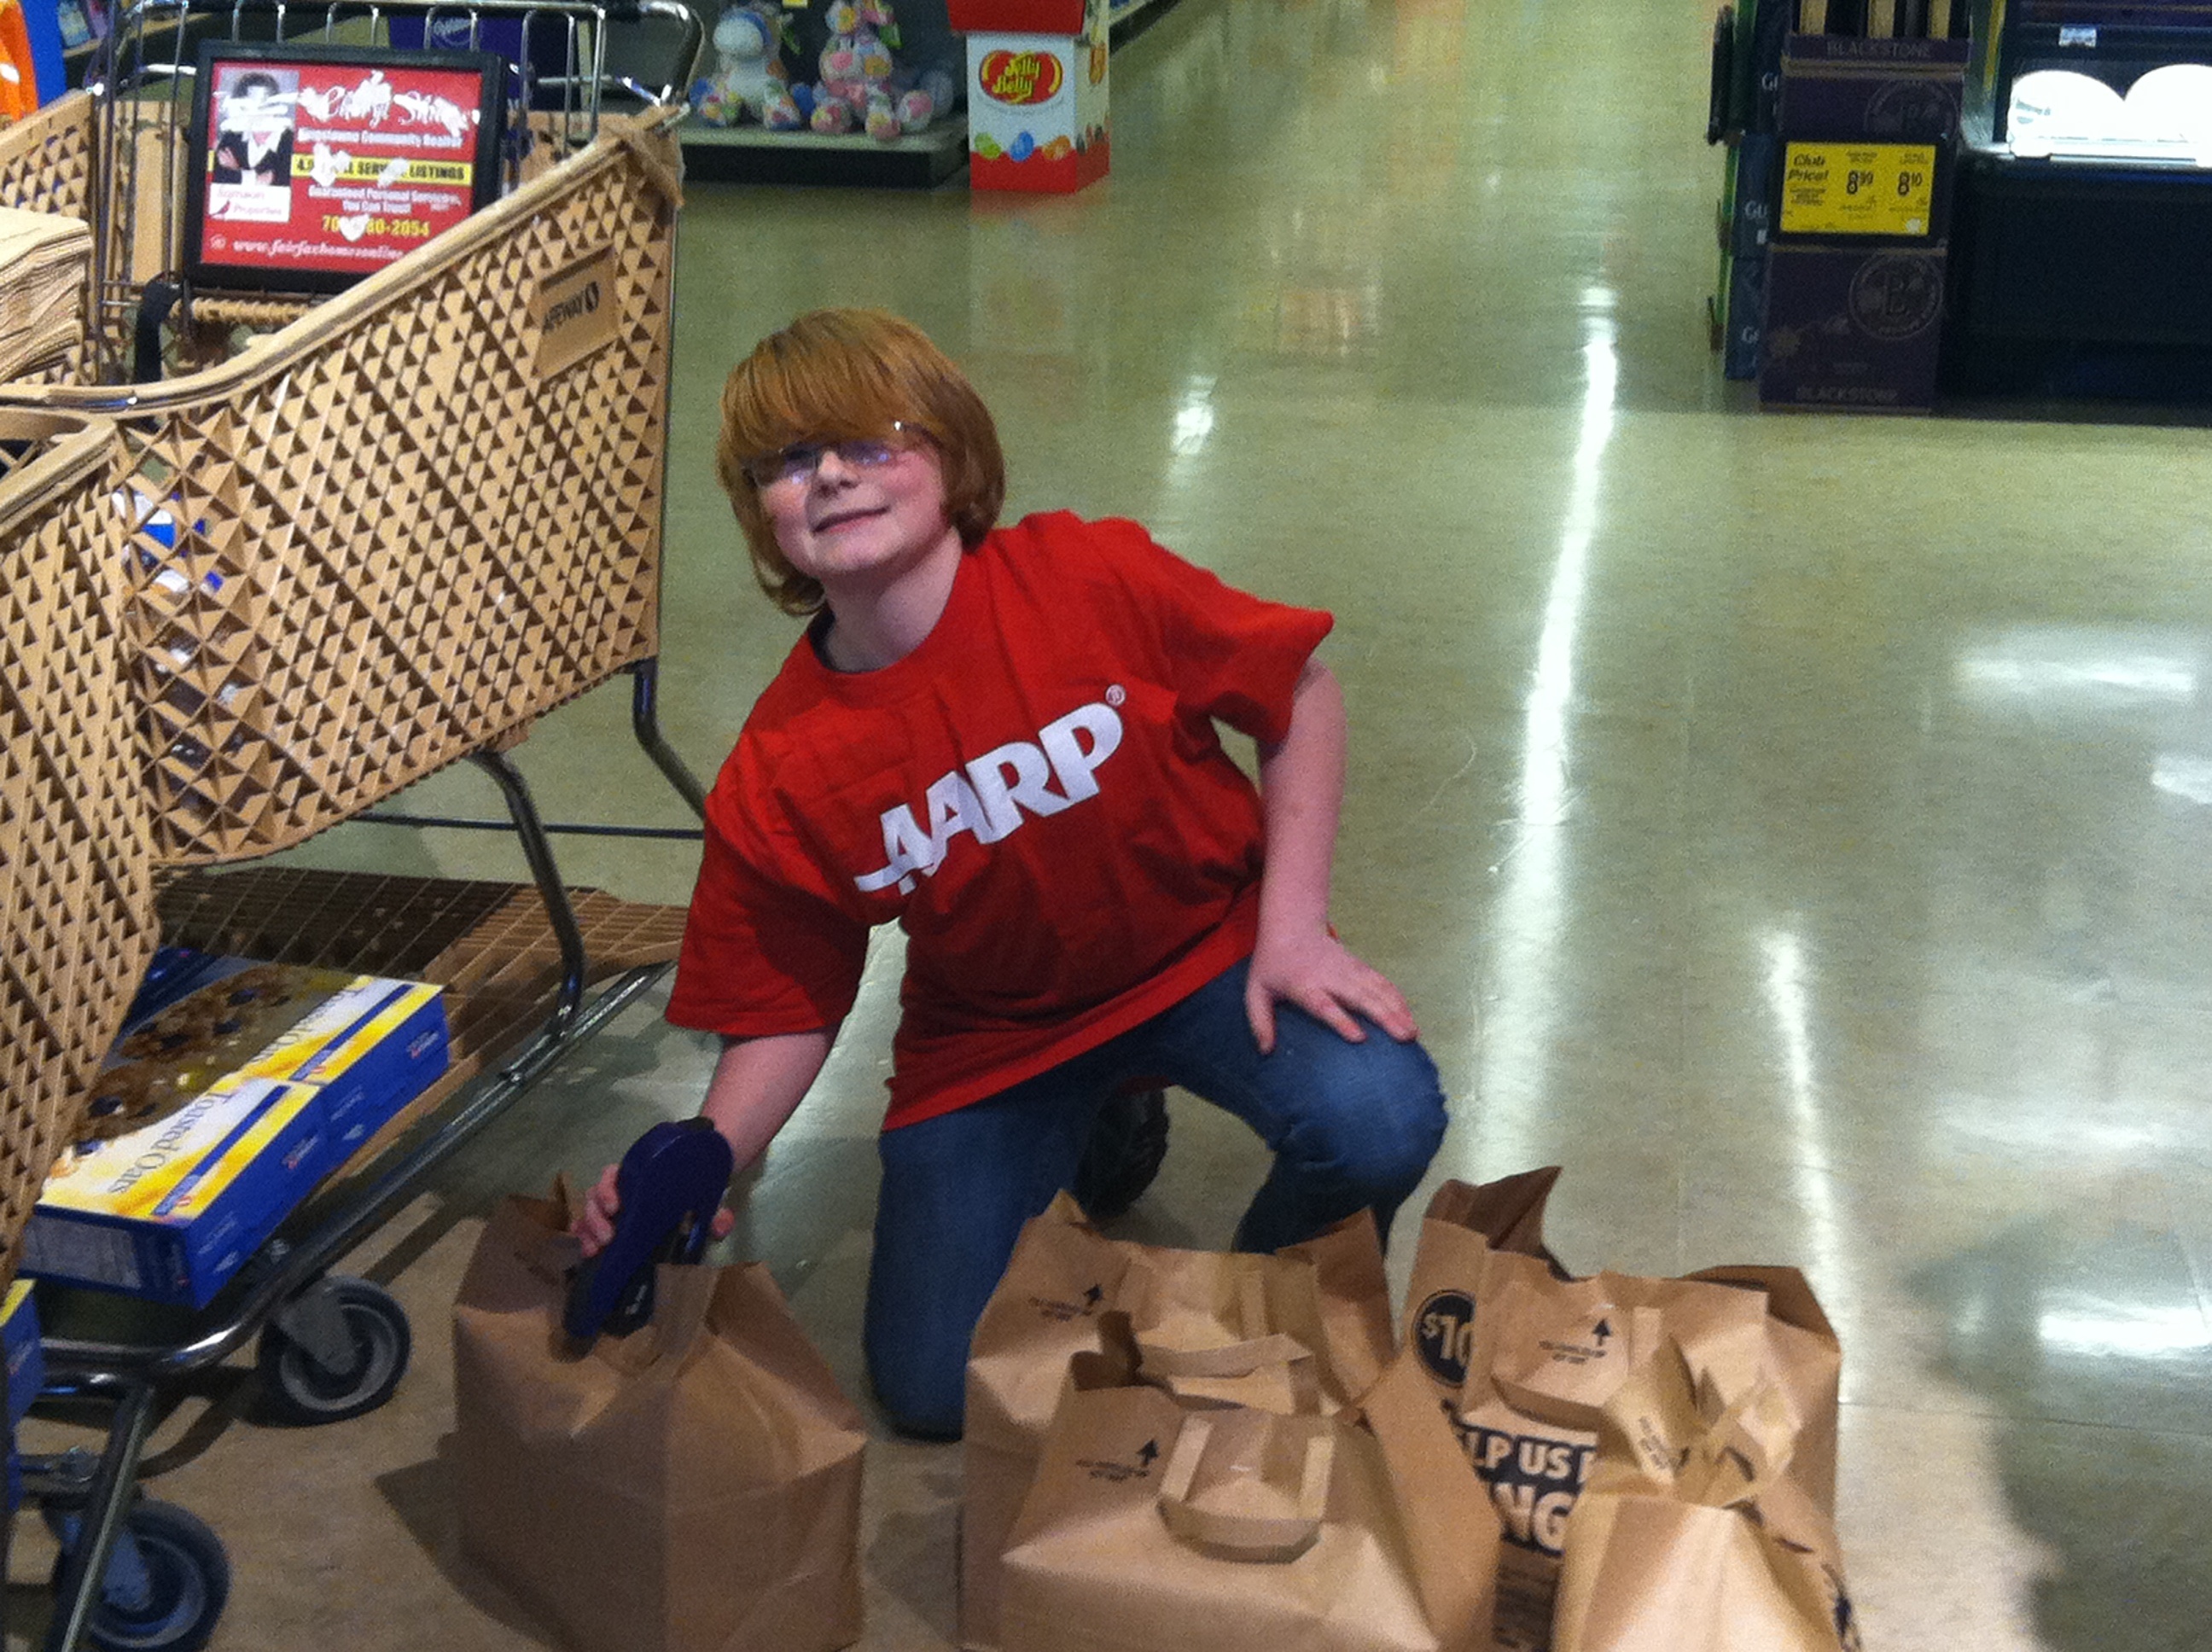 Kelly's 14-year-old neighbor offered to help encourage customers to donate at a local Safeway store in Alexandria, VA.